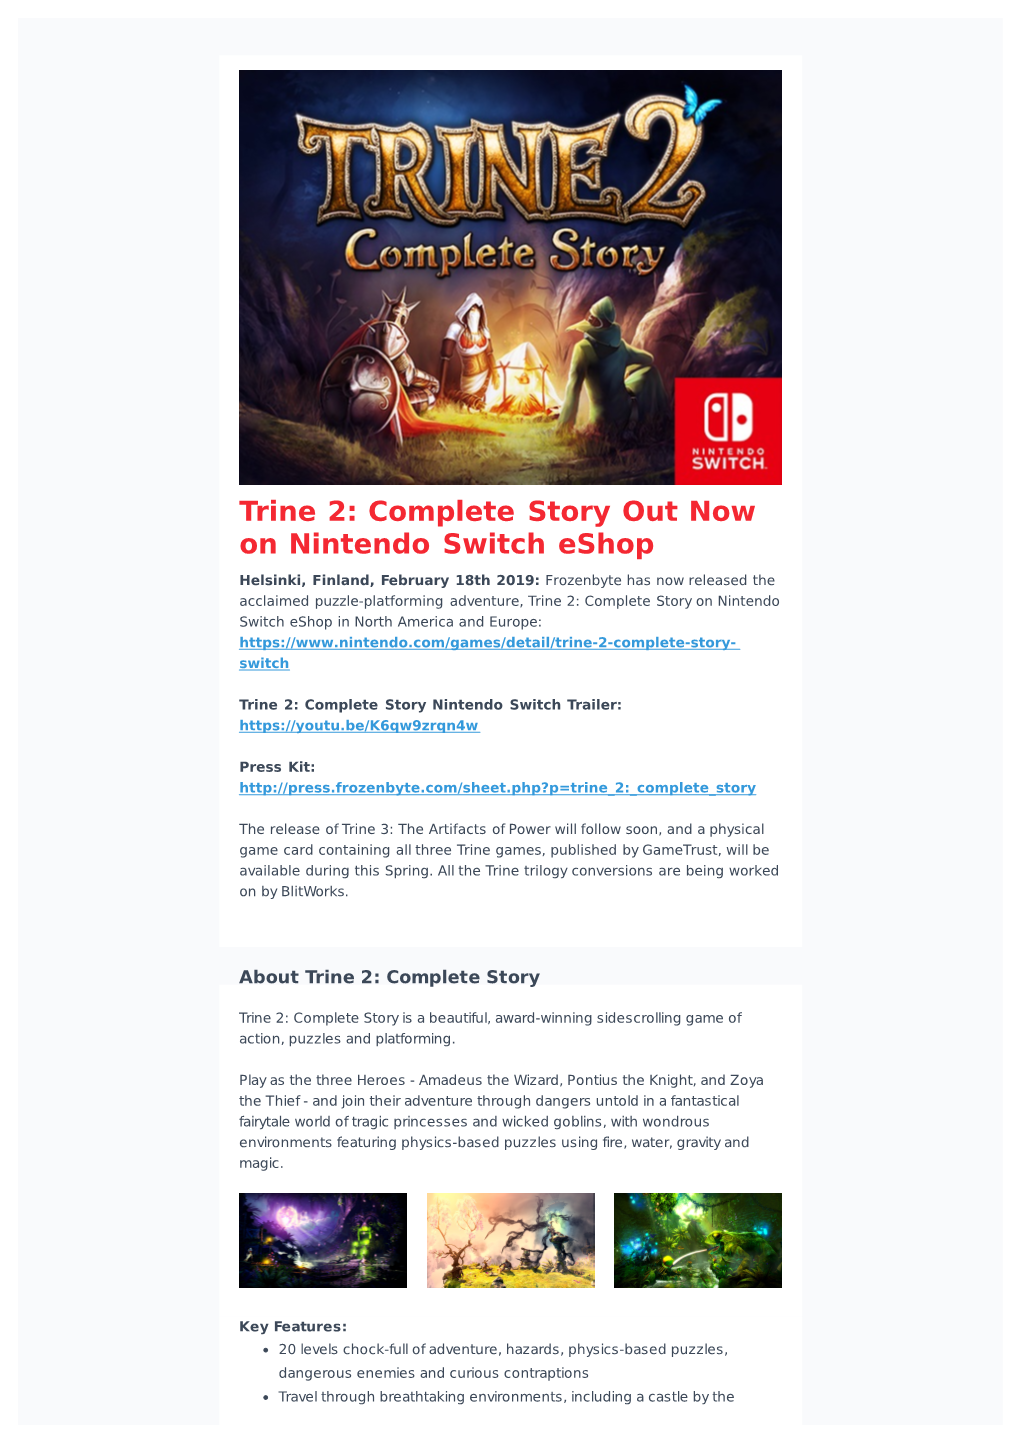 Trine 2: Complete Story out Now on Nintendo Switch Eshop